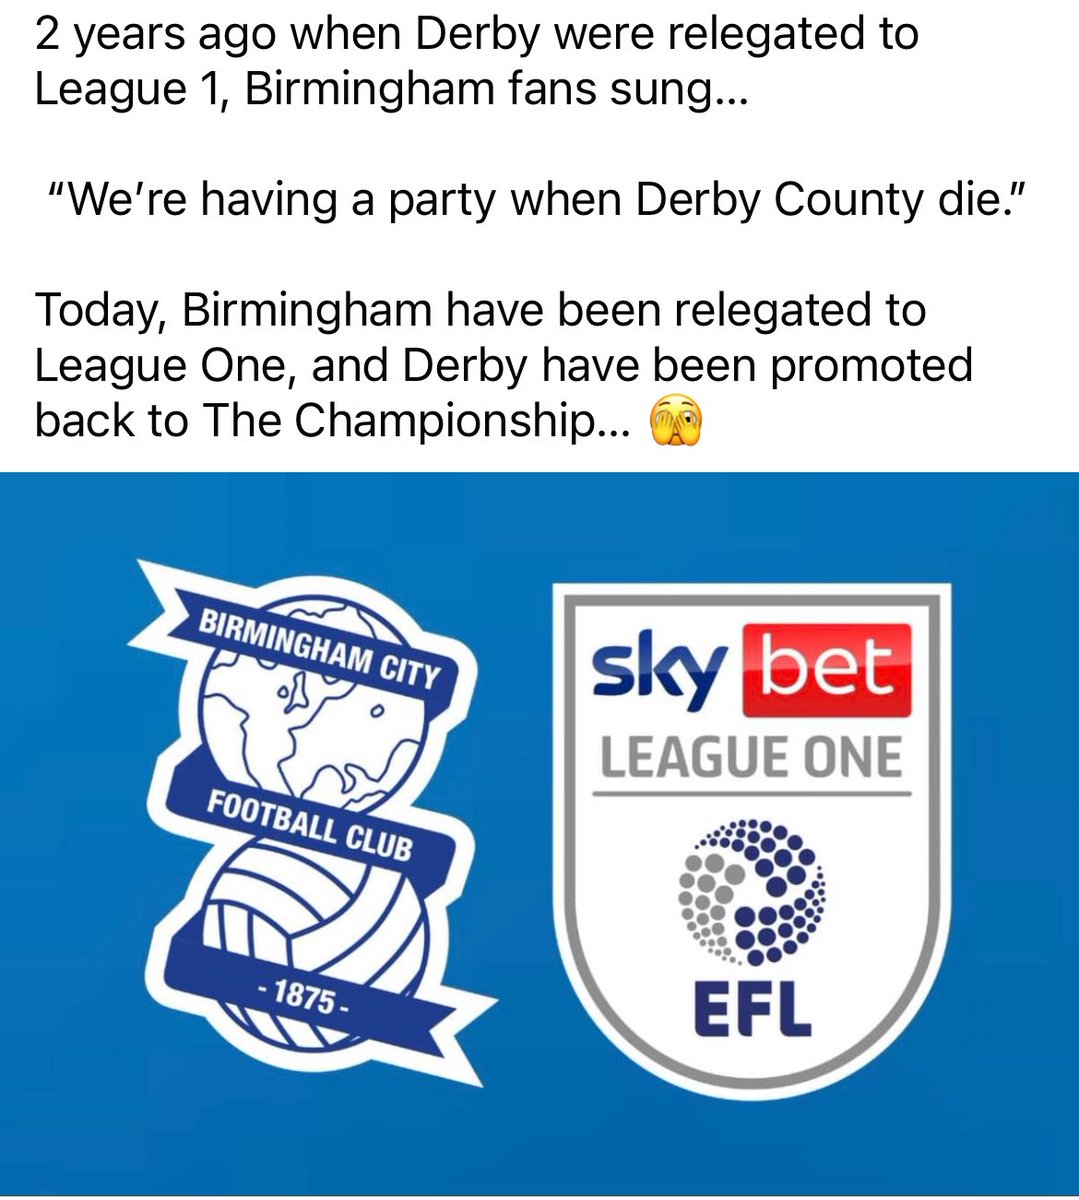 Where are they now!? @BCFC 😂 Delighted for John Eustace too. Was looking forward to revenge next season but never mind! Enjoy an utterly dreadful league 🐏🐏🐏